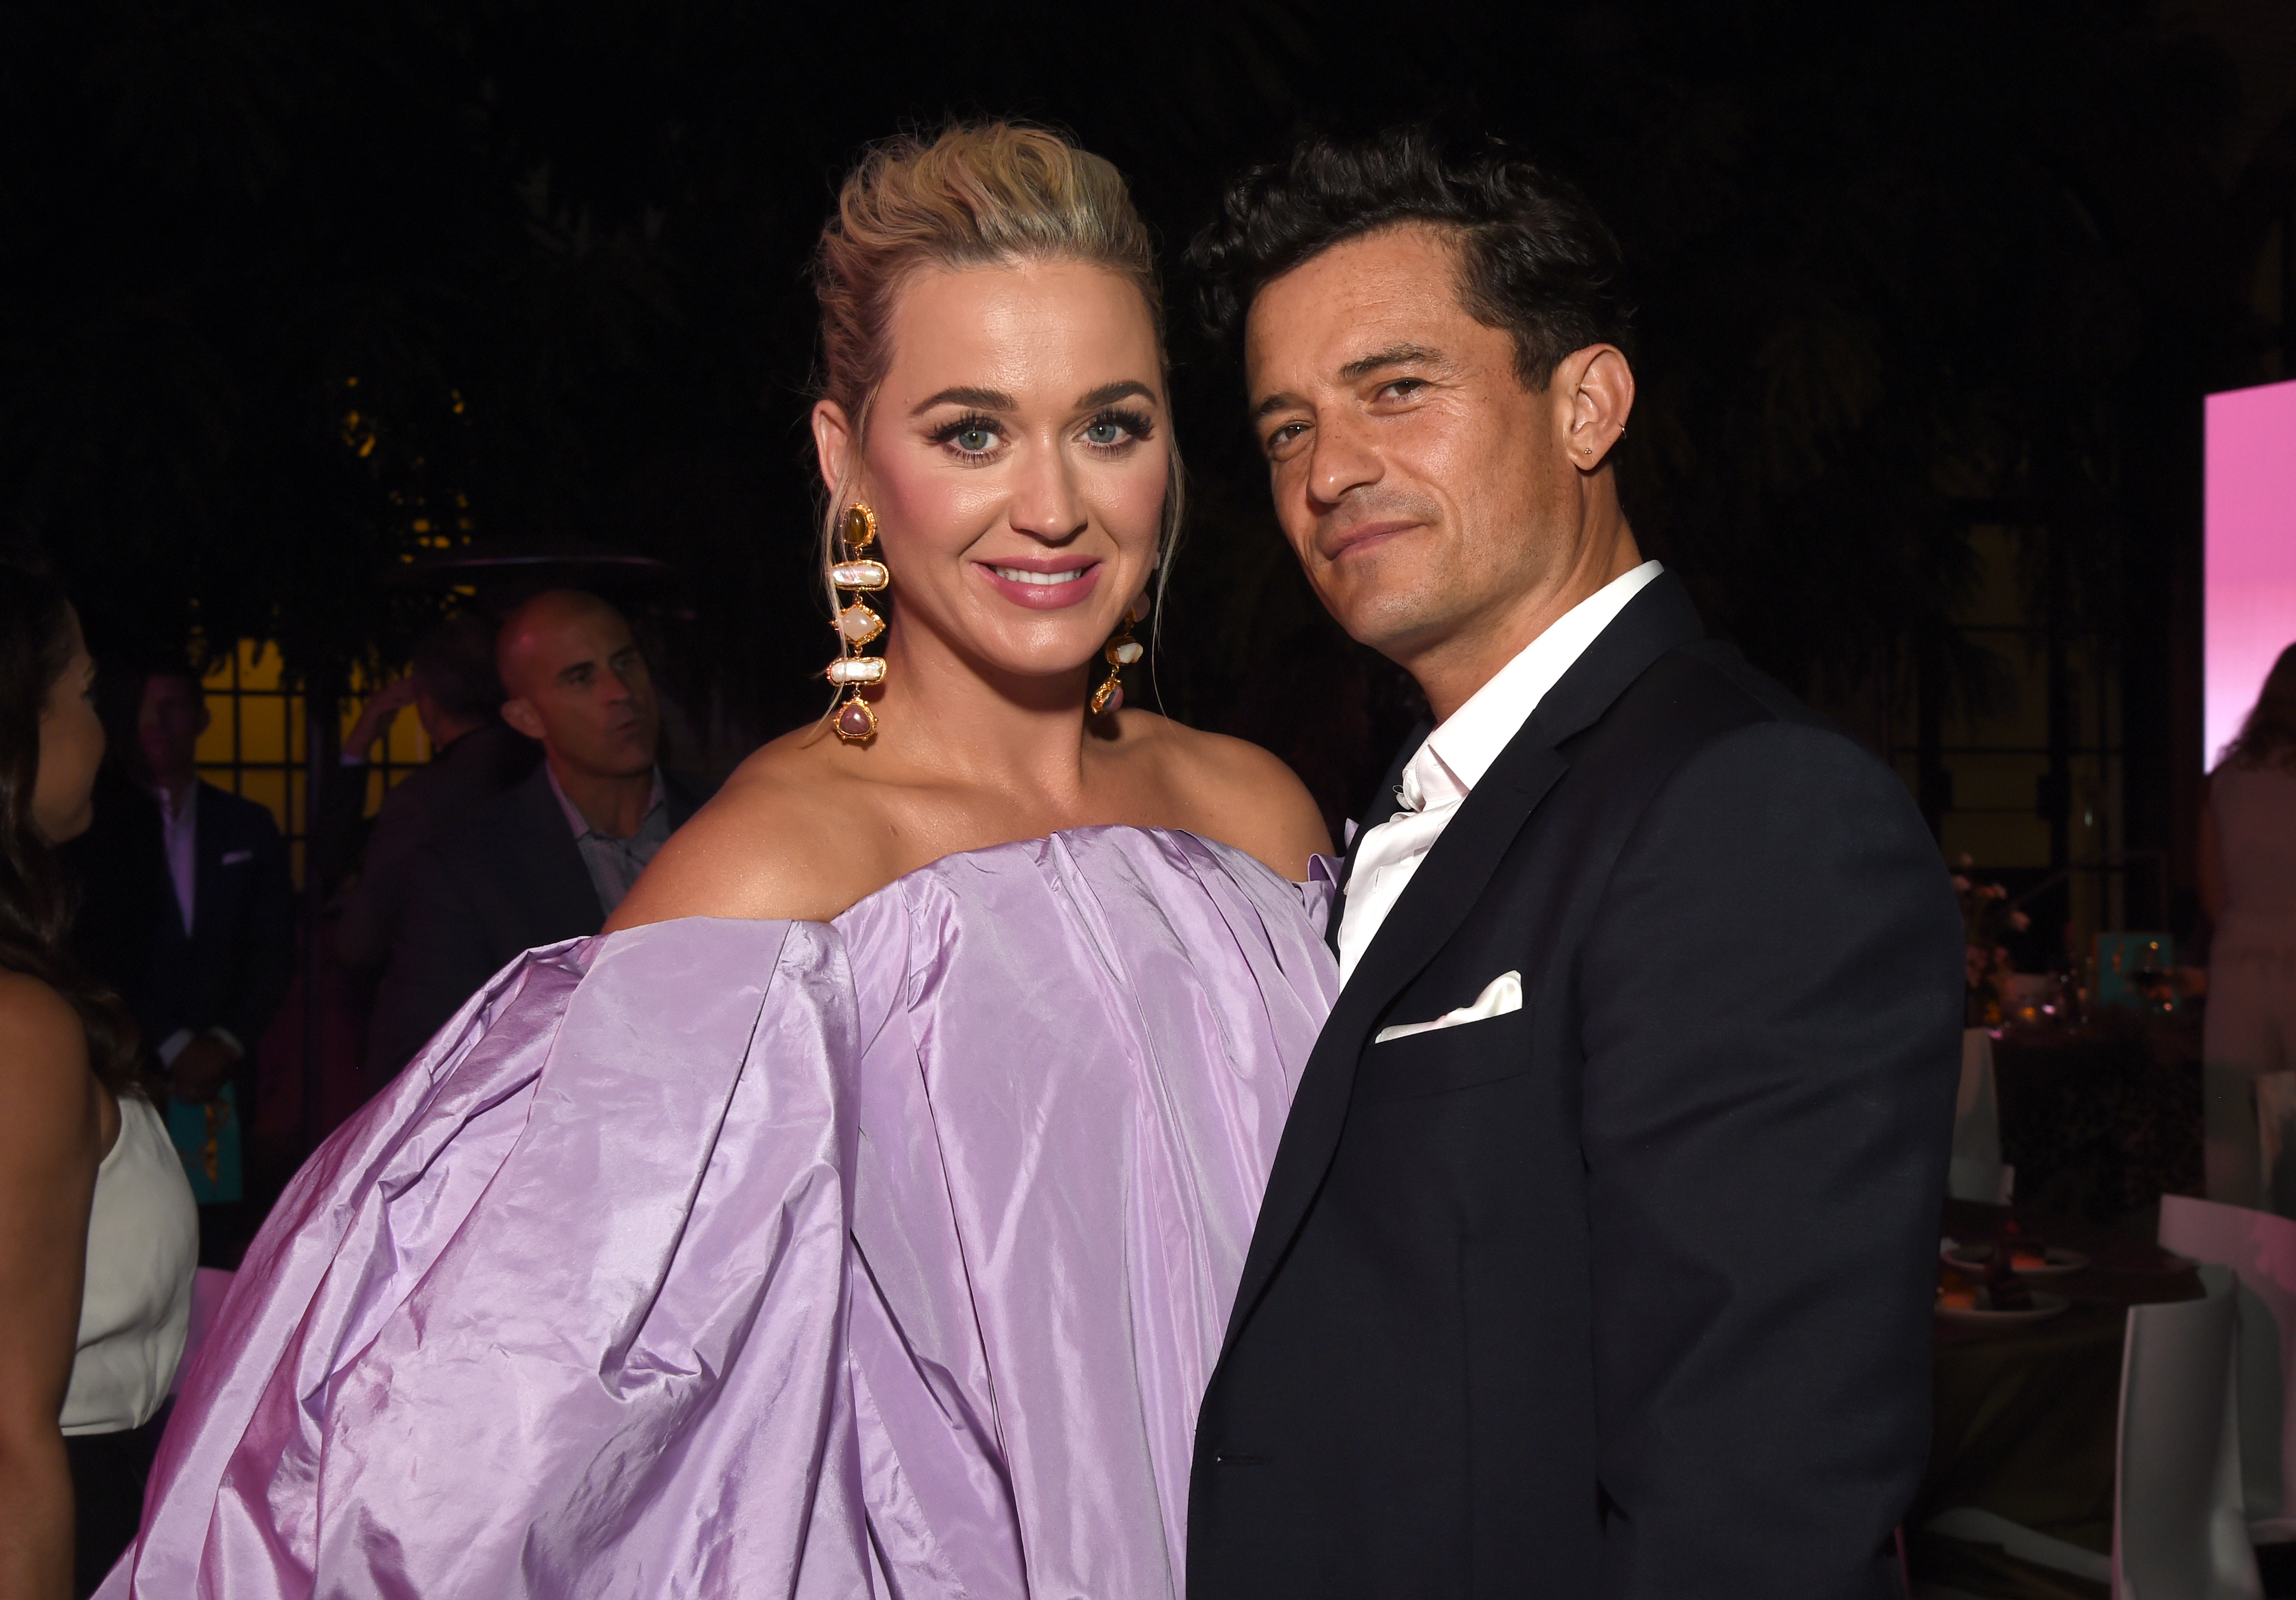 Rumors have circulated that Katy is expecting her second child with her fiancé Orlando Bloom